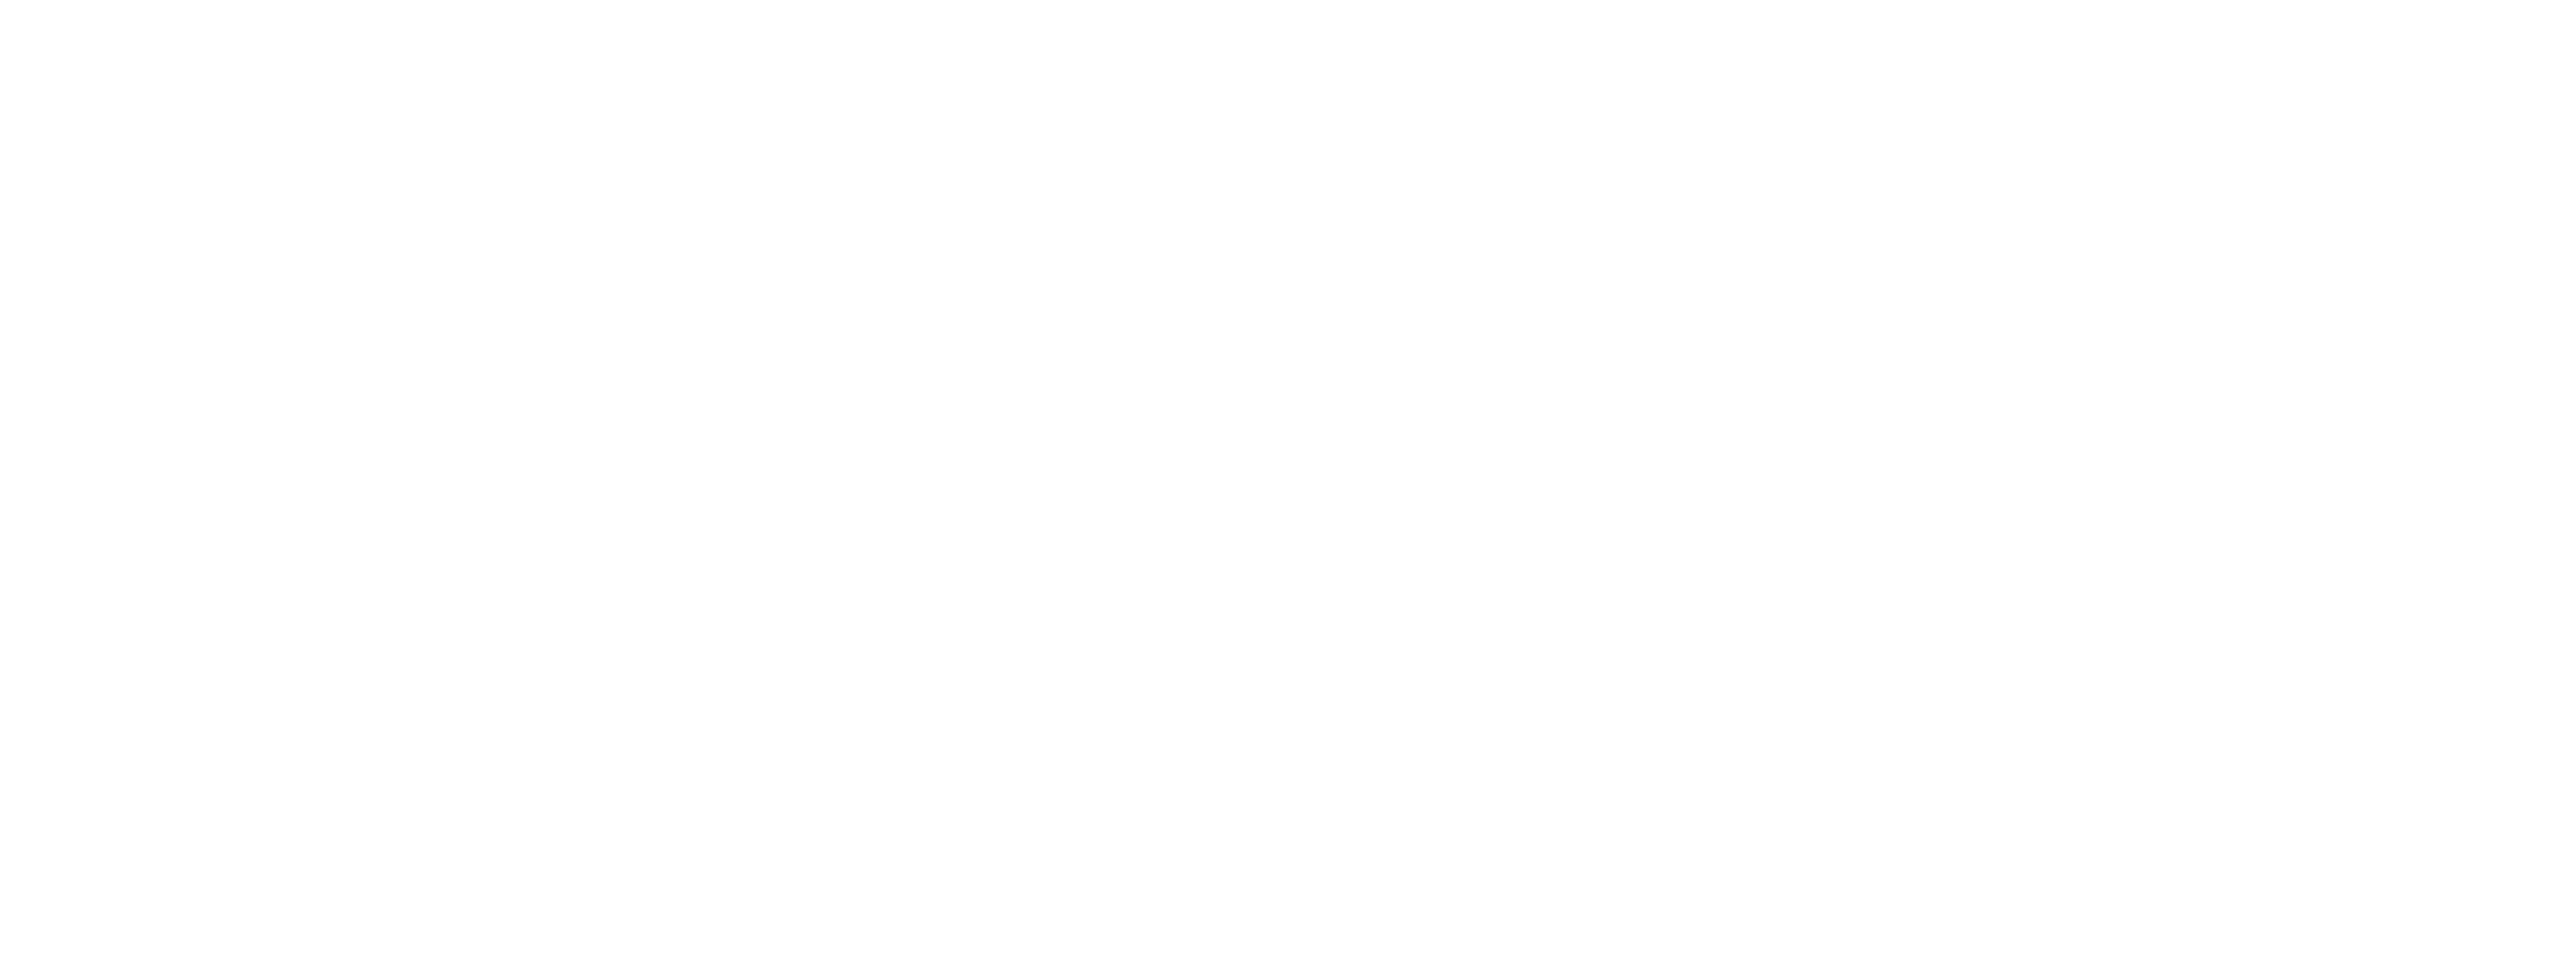 Evening entertainment in Smiths Falls, Ontario. &amp;nbsp;Bowie's is a world class concert series. &amp;nbsp;It's an open stage. &amp;nbsp;Bowie's is a variety show and a neighbourhood bar. &amp;nbsp;Performing arts and craft beer are two of our favourite things. &amp;nbsp;I bet we have a lot in common.&amp;nbsp;&lt;br&gt;